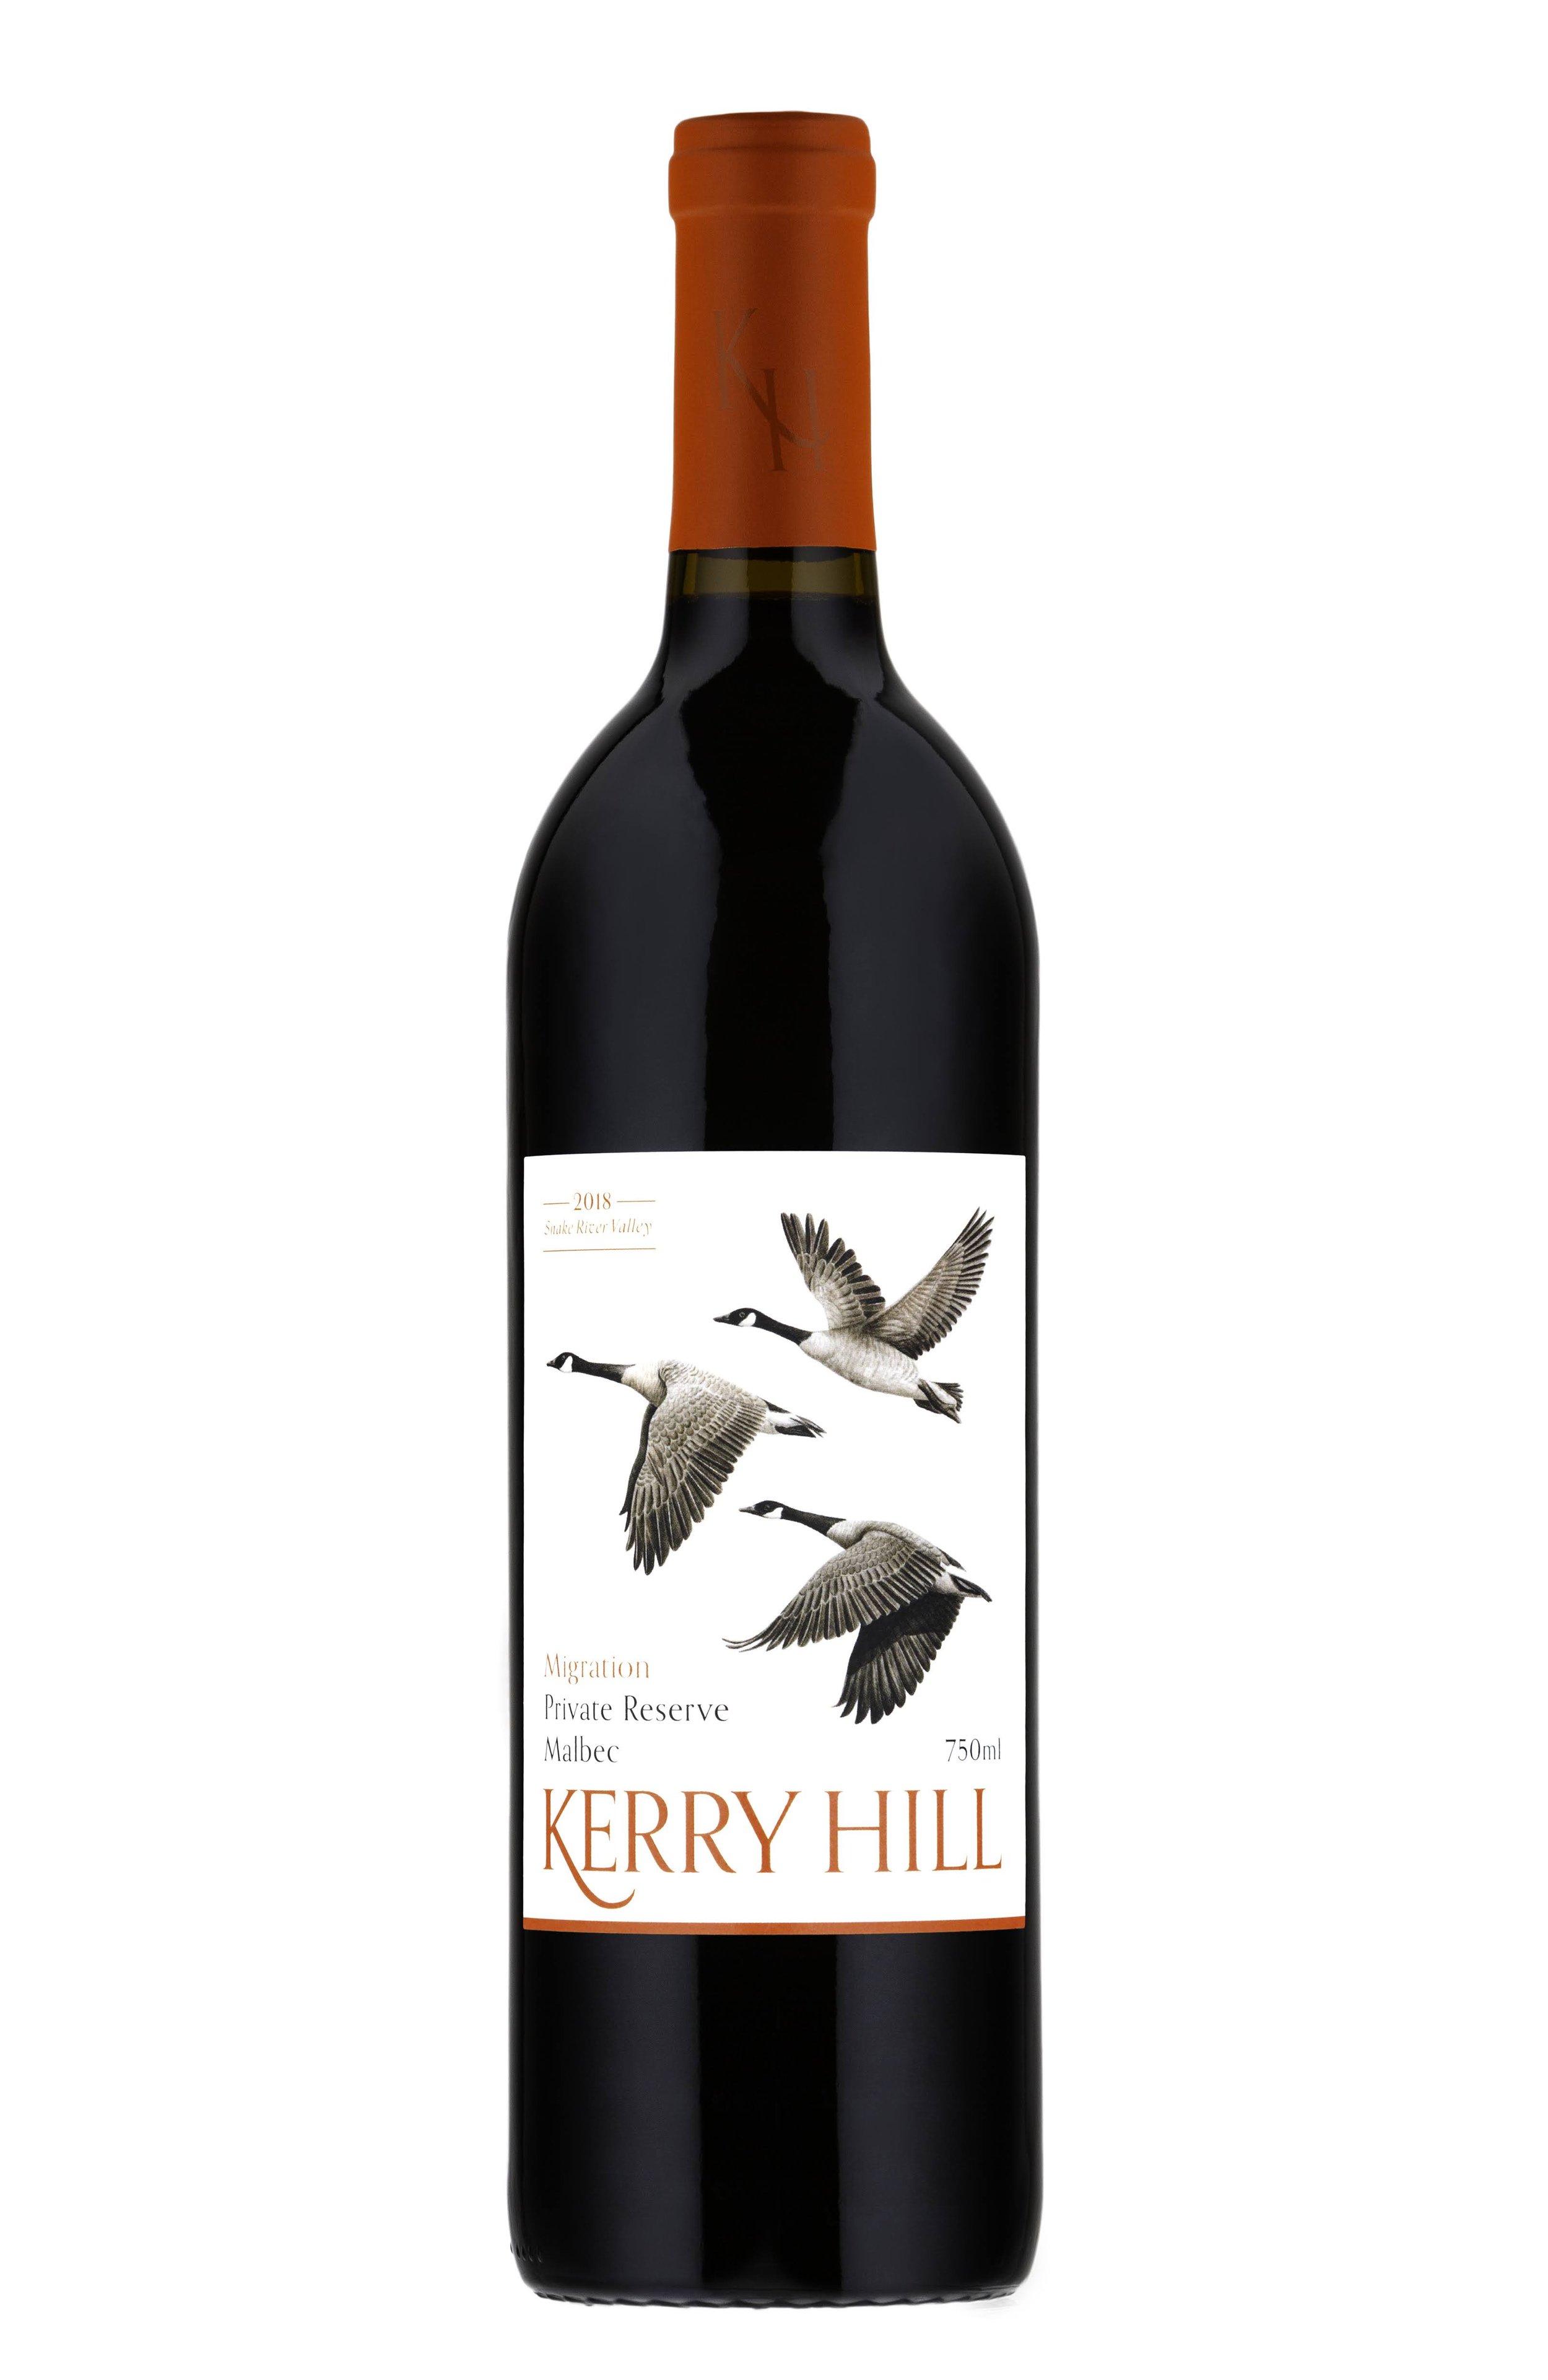 Bottle of Kerry Hill Red Wine